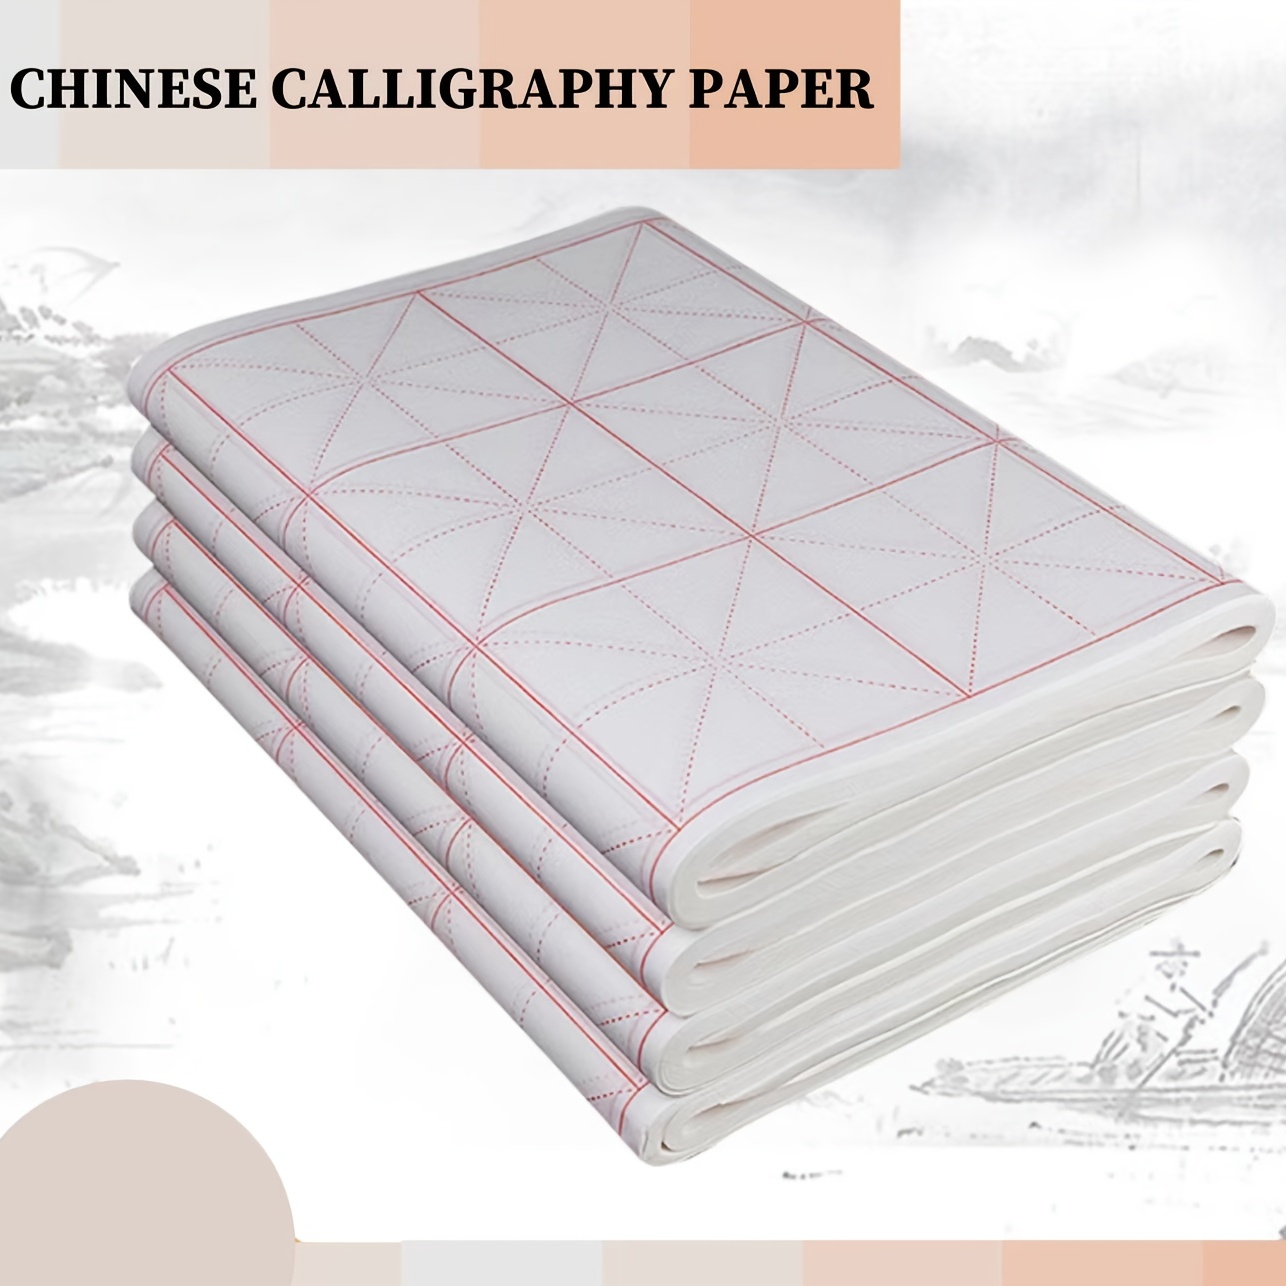 Healifty 150 Sheets Chinese Calligraphy Paper Grid Paper Xuan Rice Paper for Chinese Calligraphy Brush Ink Lover Beginner Writing Sumi Set